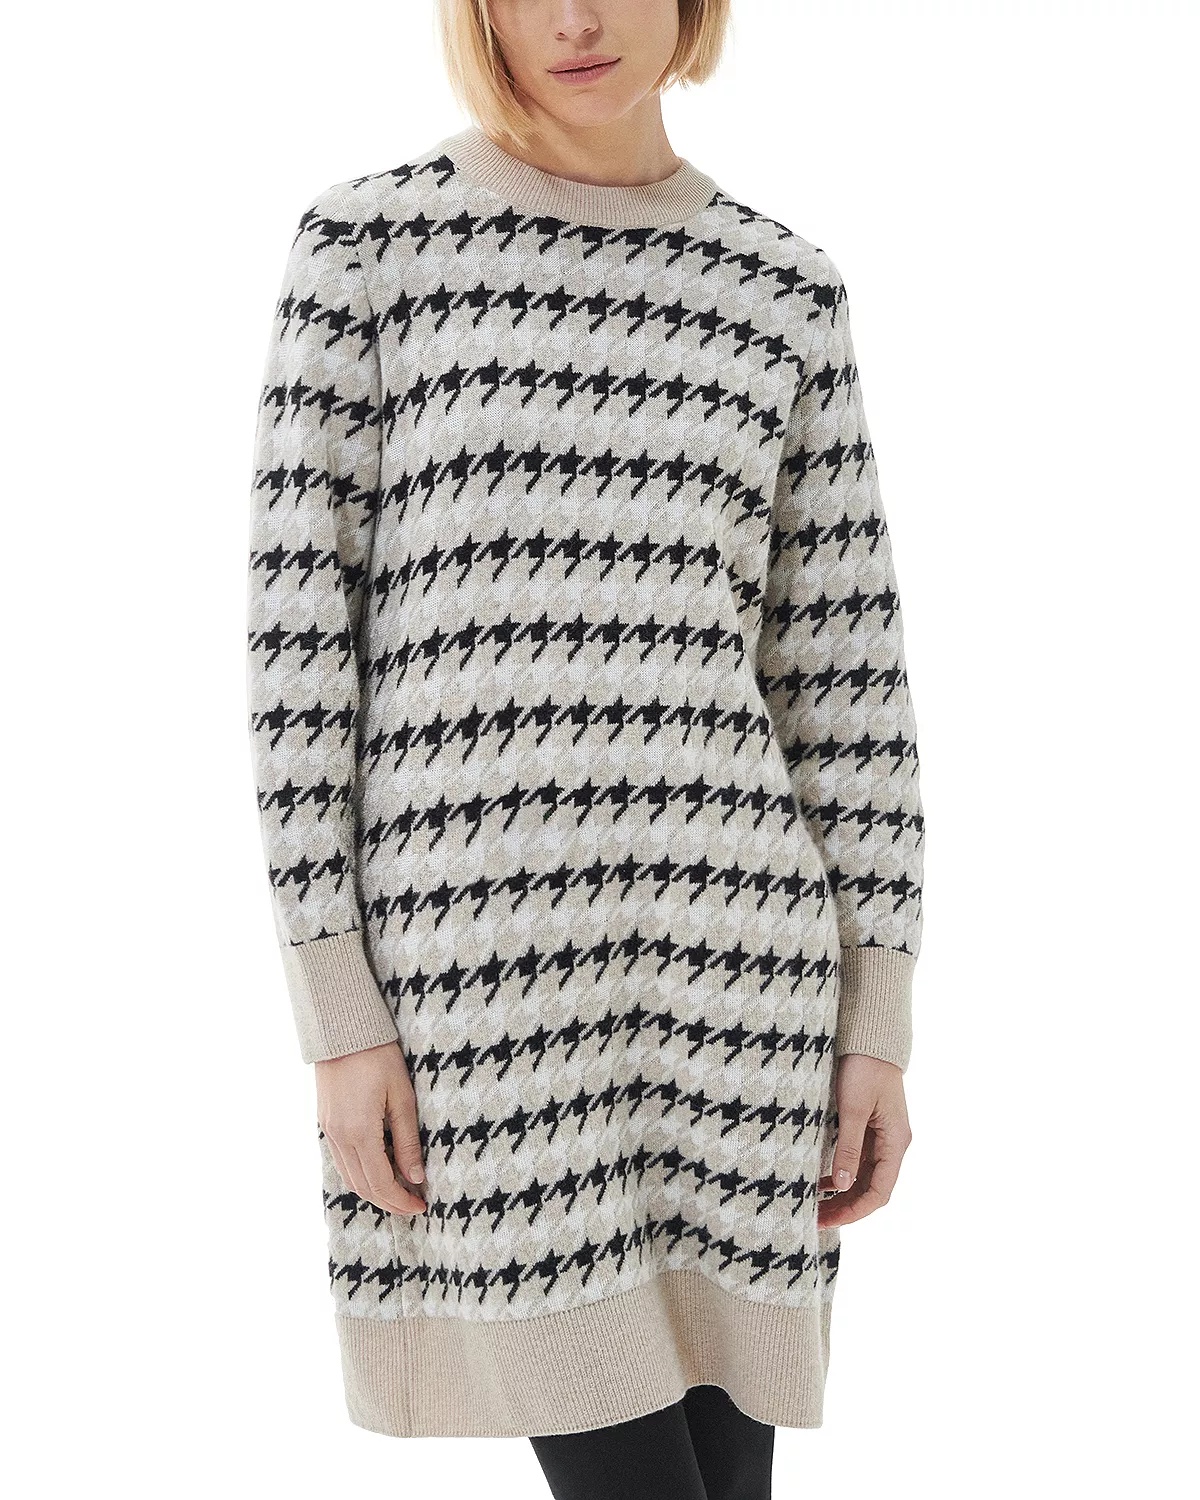 Marie Houndstooth Knit Dress - 1